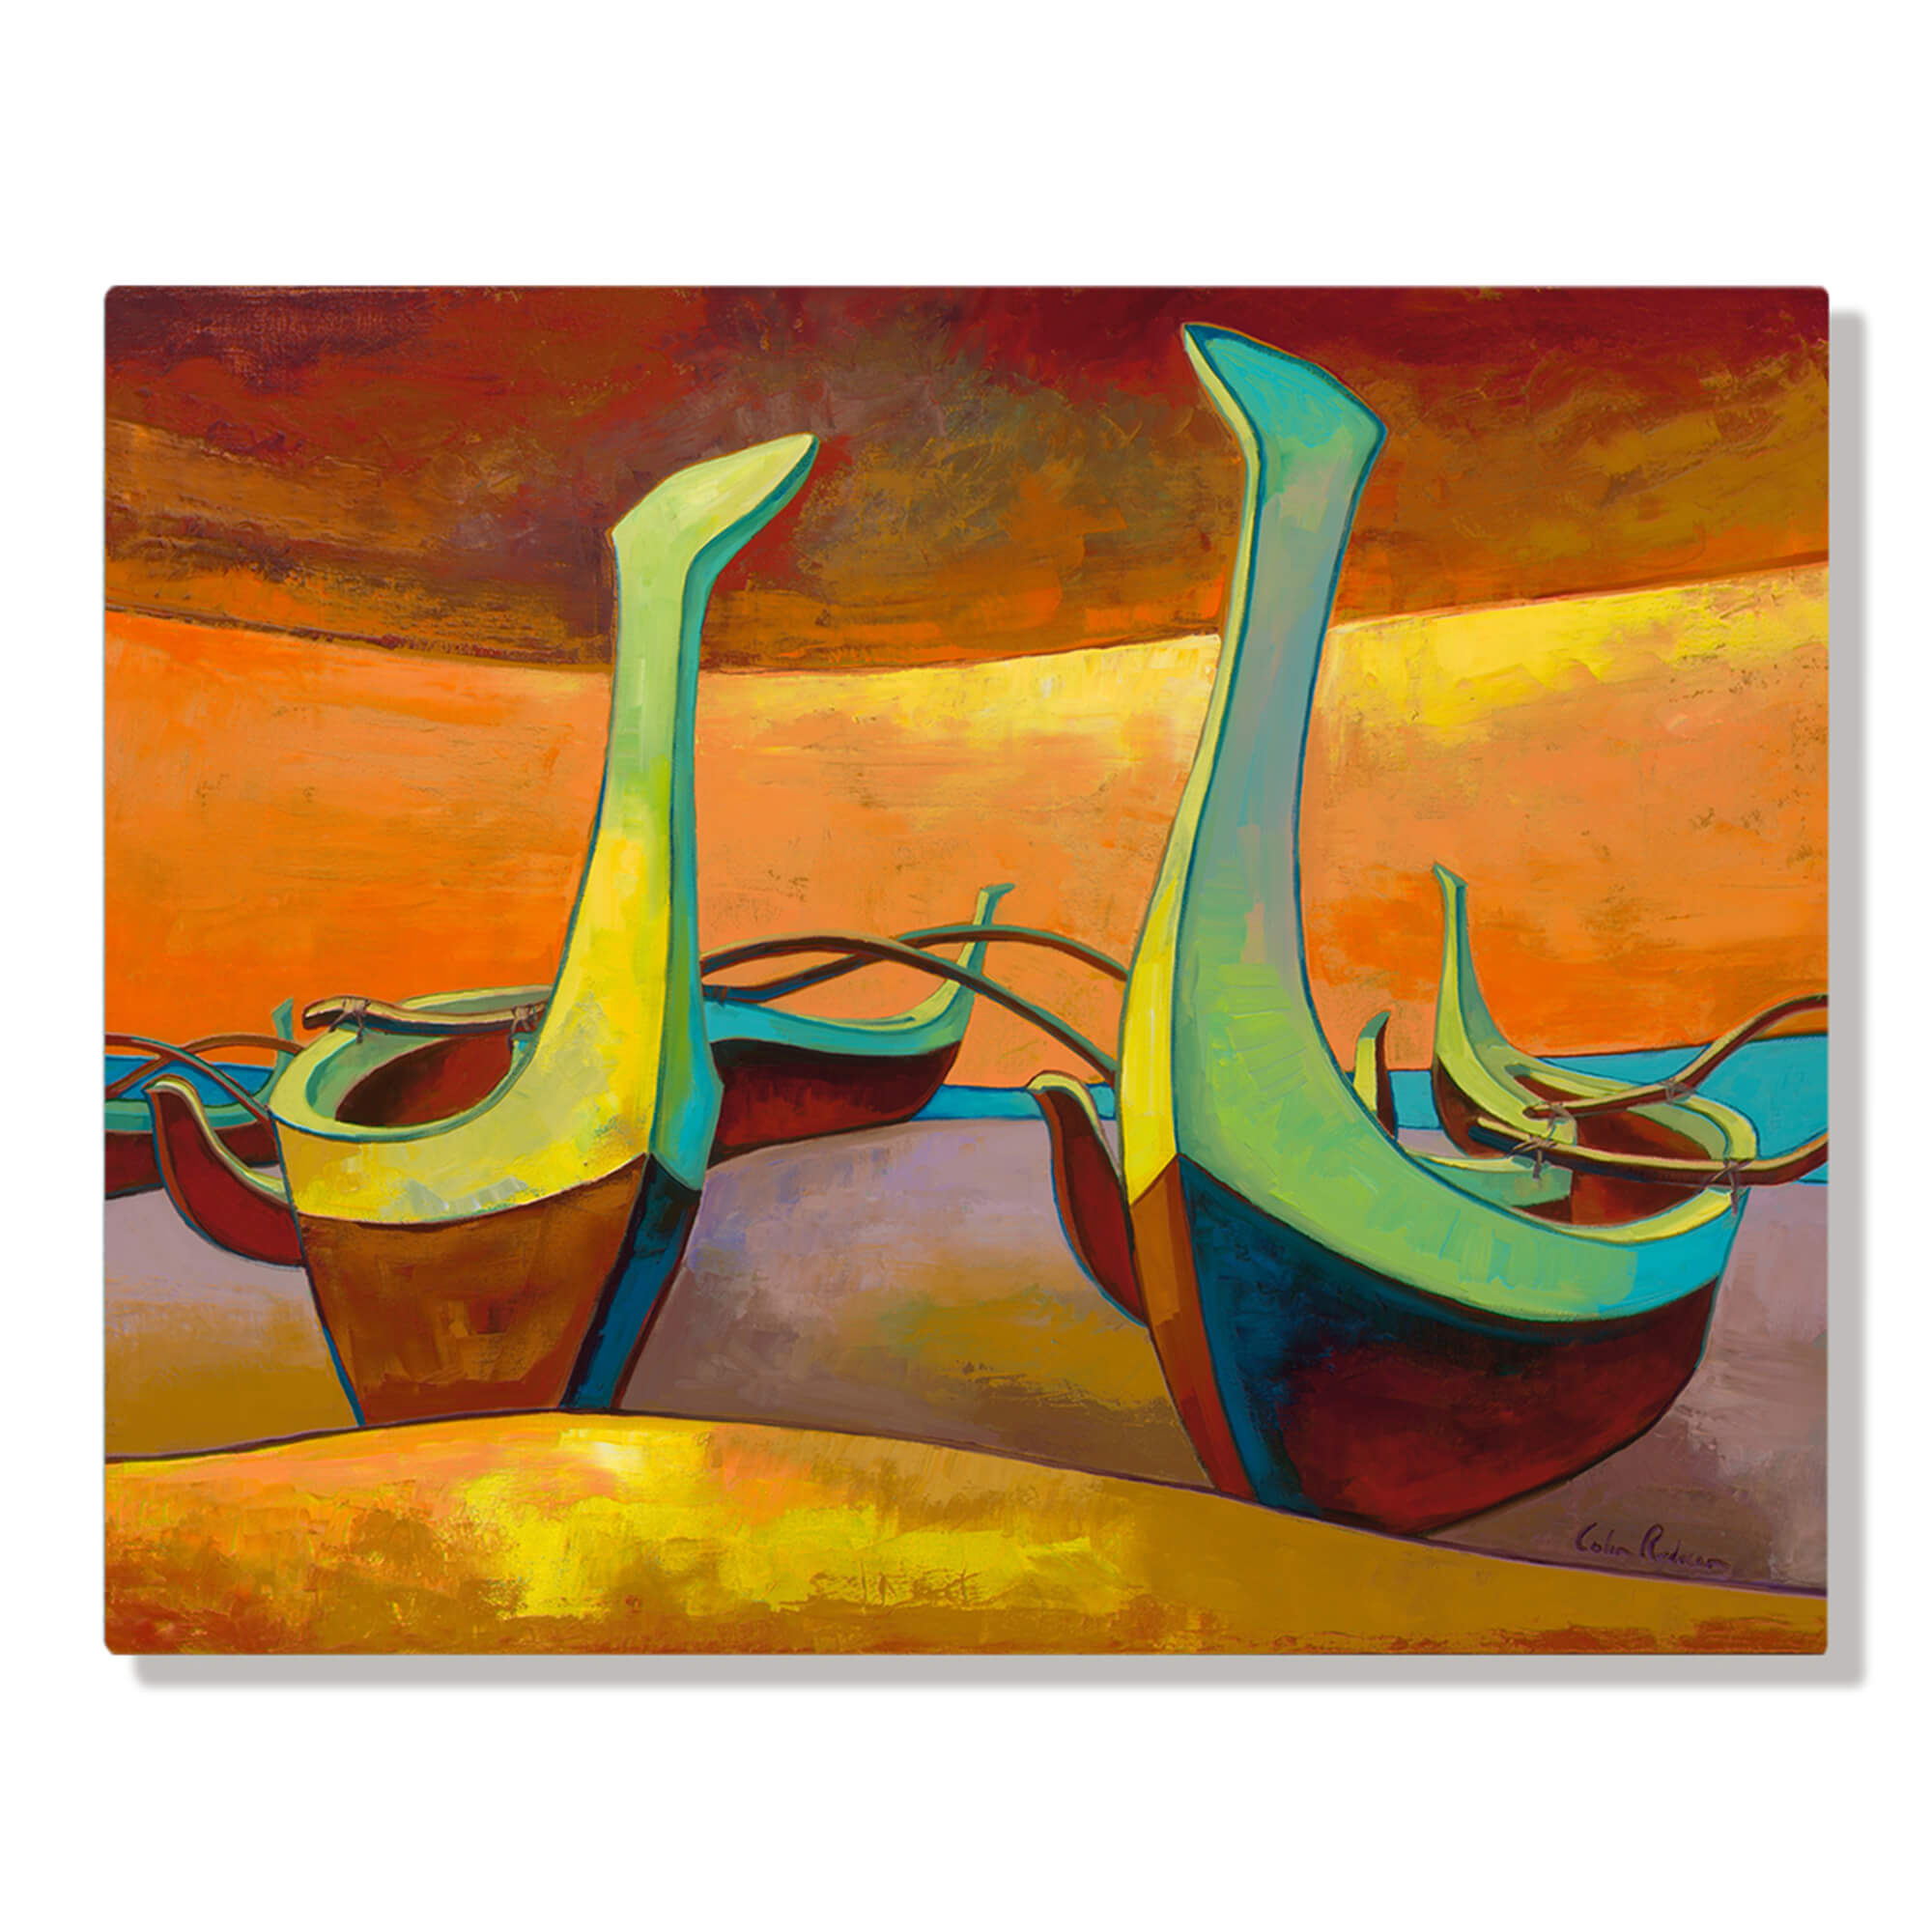 Boat on the shore by Hawaii artist Colin Redican